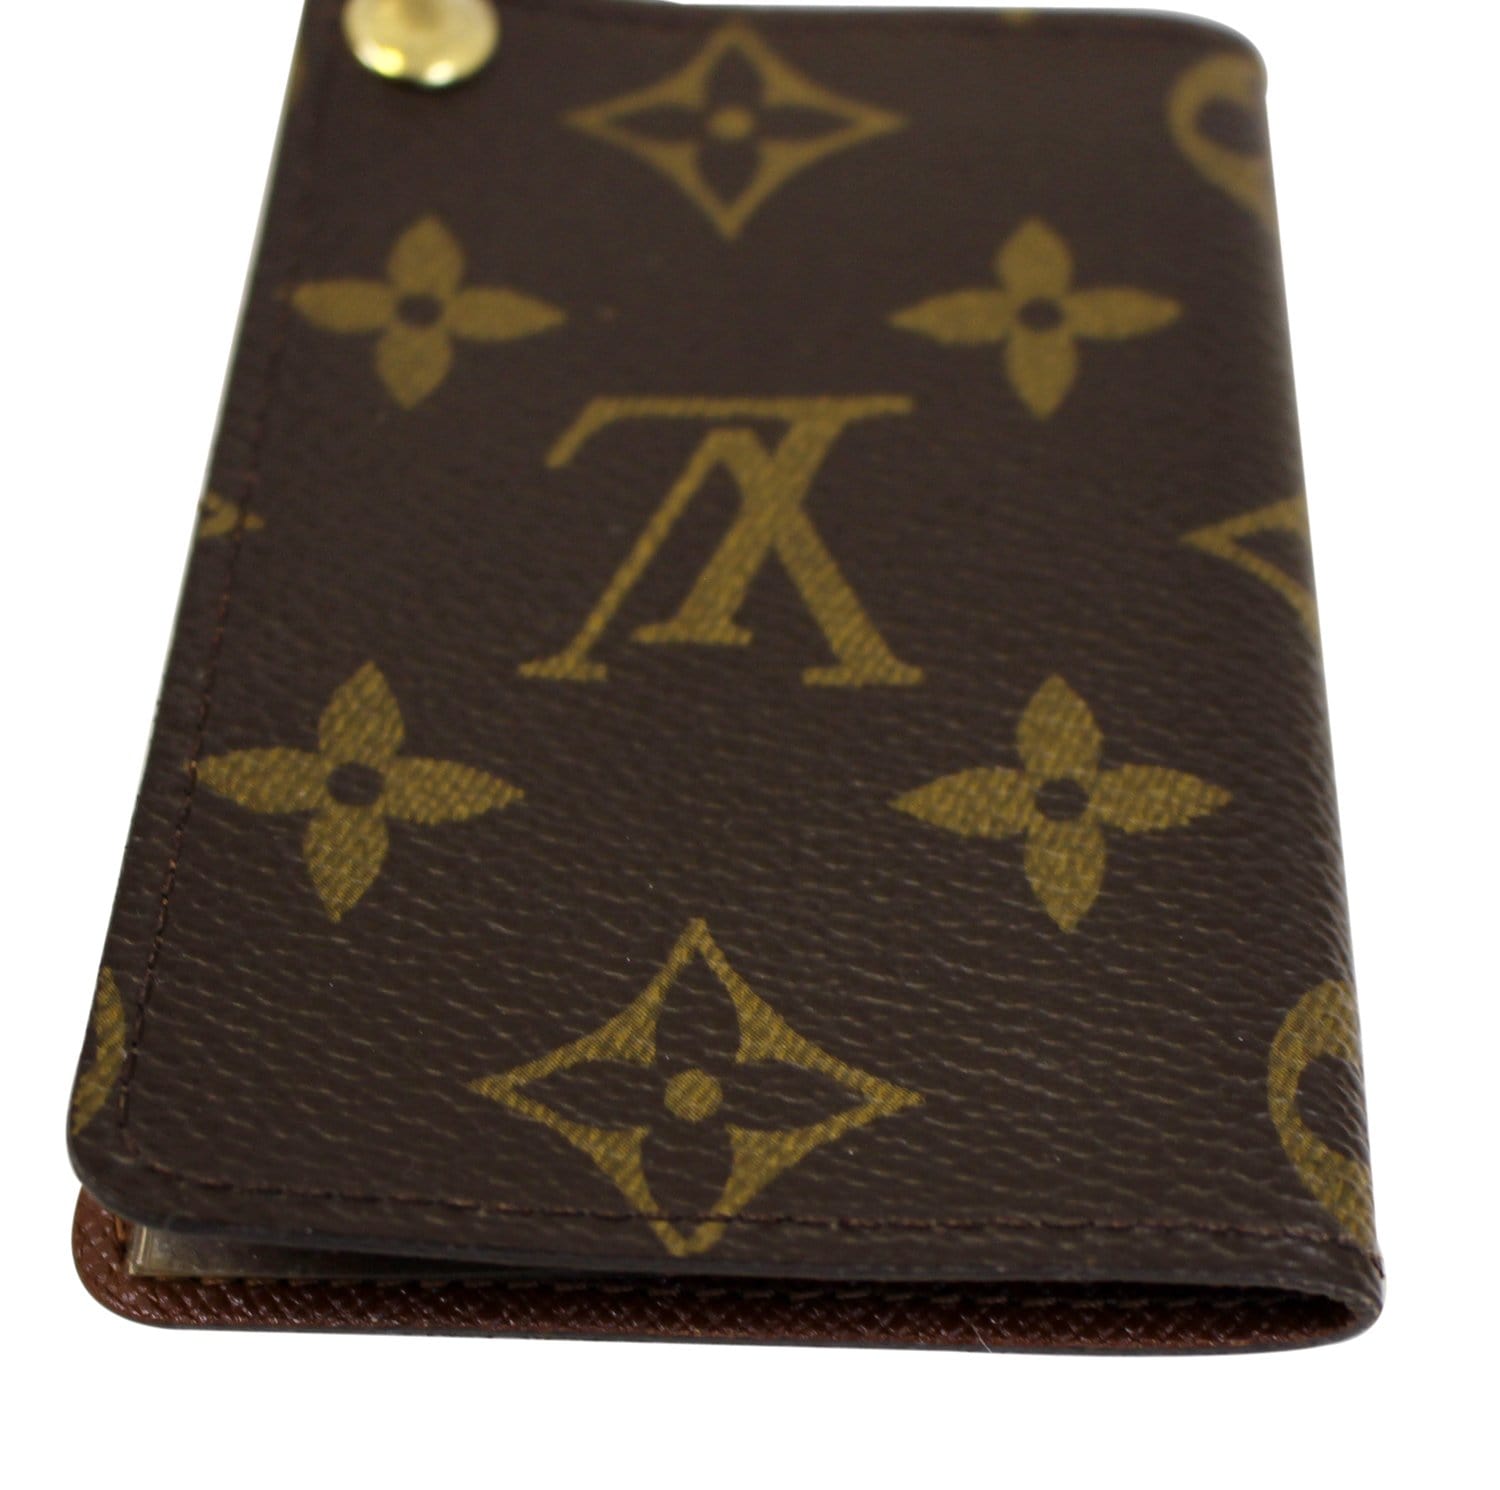 Louis Vuitton Monogram Card Holder for Sale in Los Angeles, CA - OfferUp